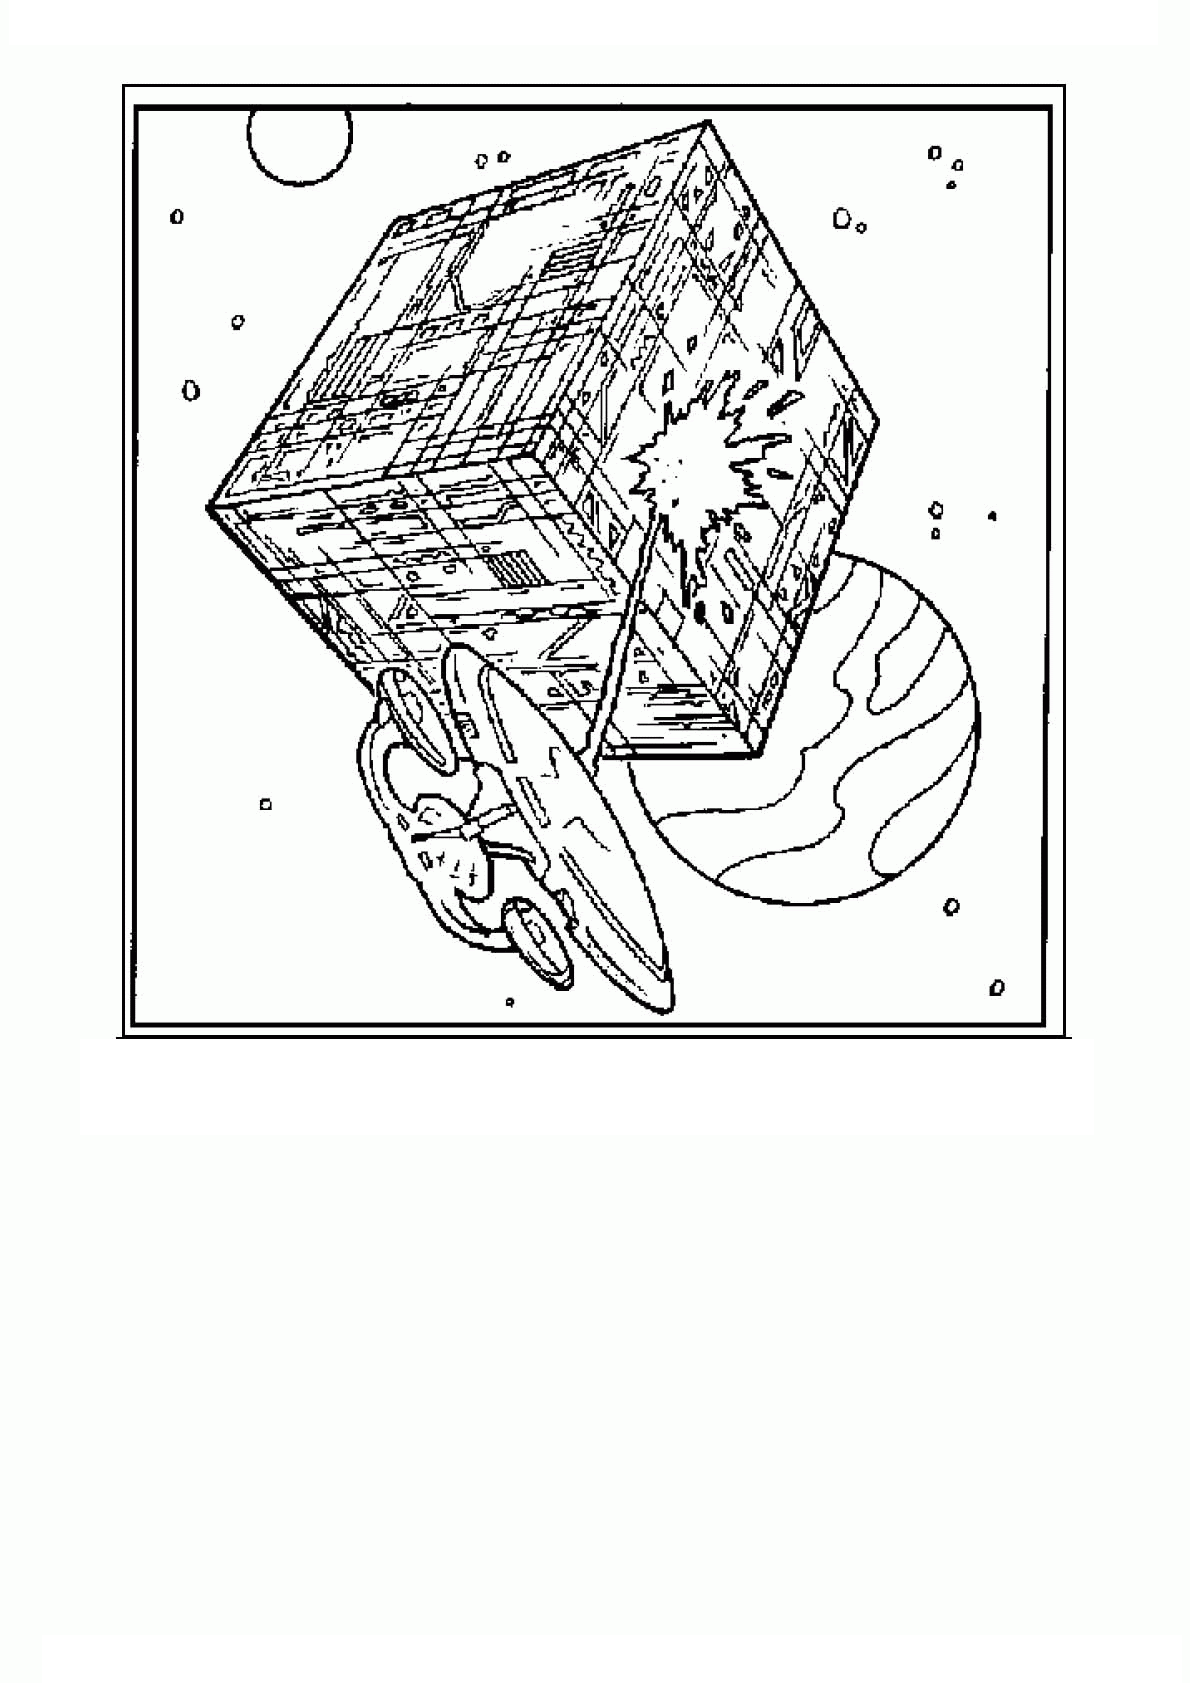 Star trek coloring pages to download and print for free